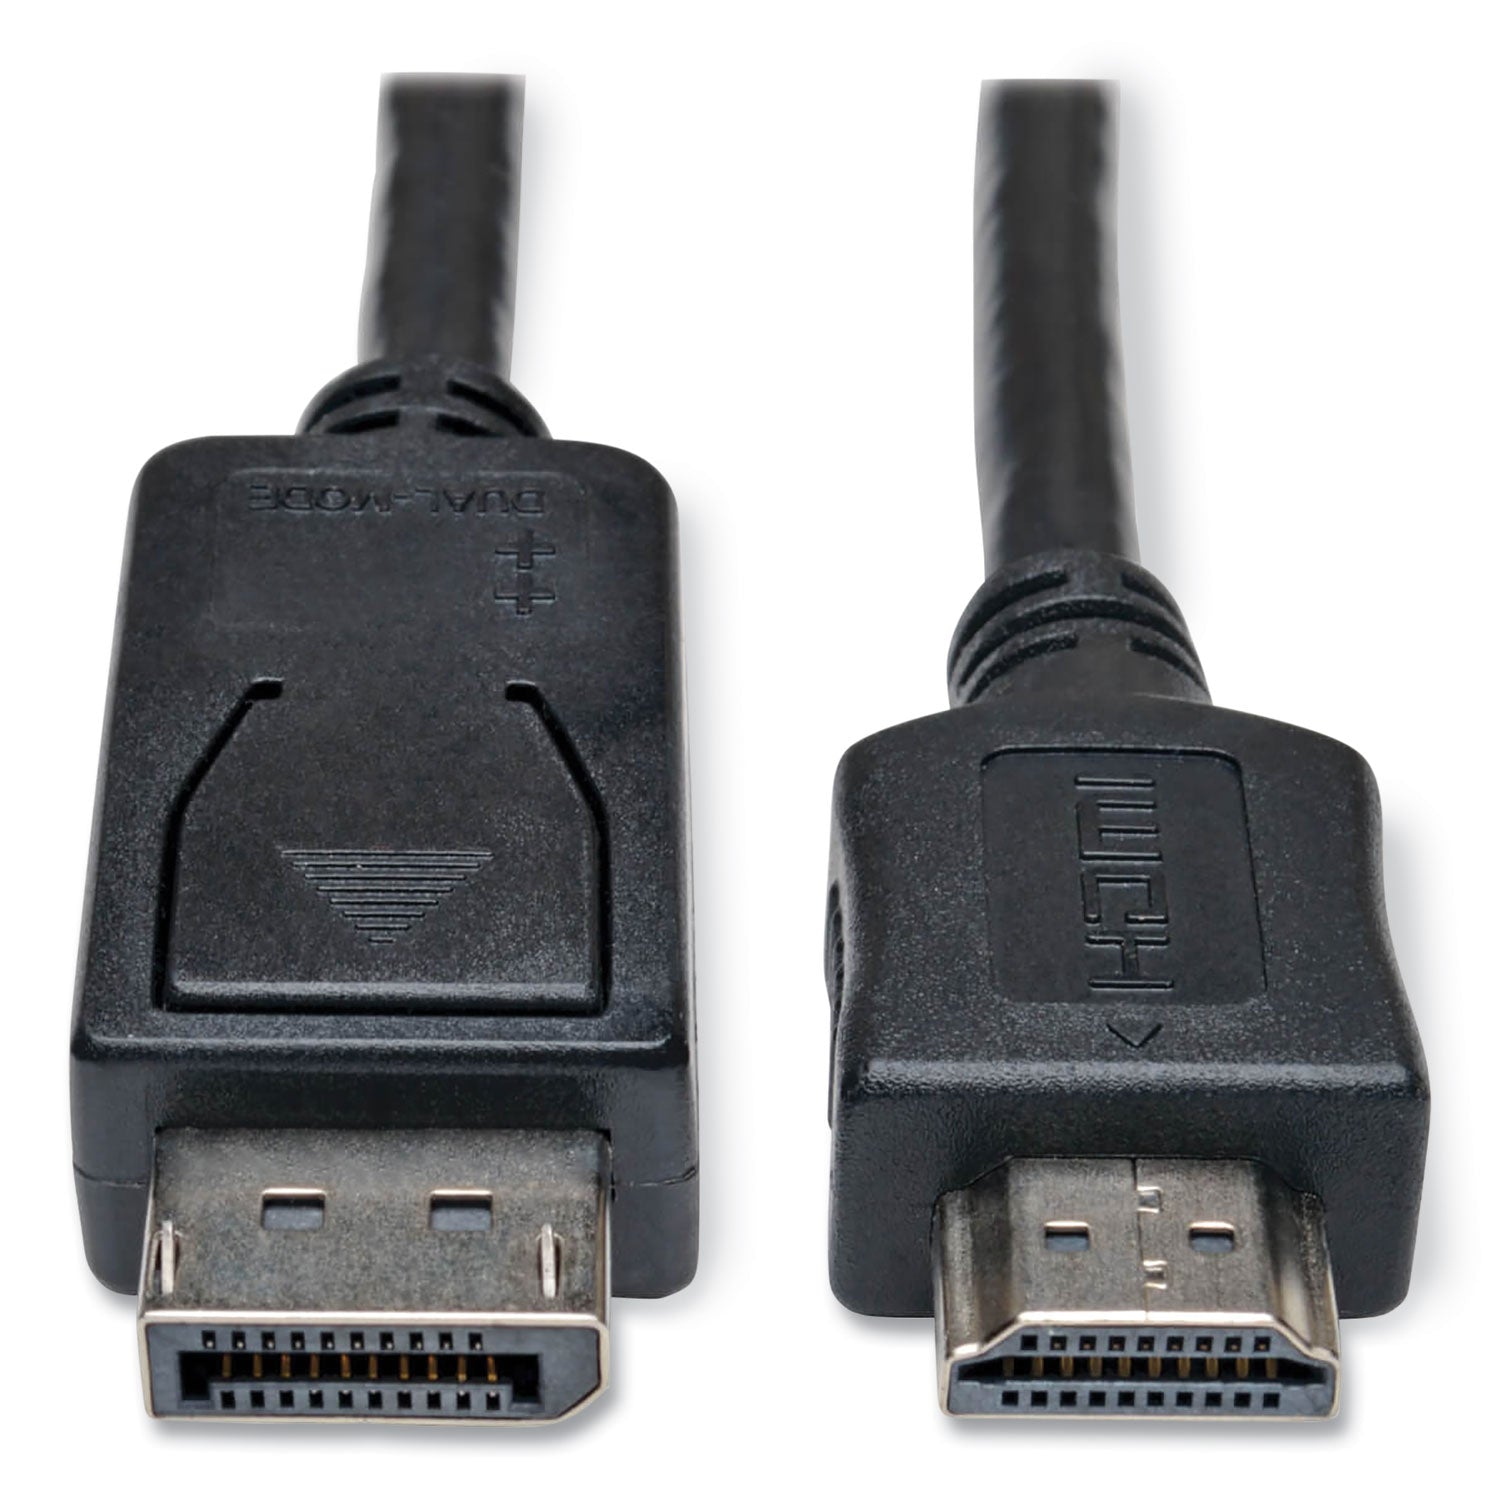 displayport-to-hdmi-cable-adapter-m-m-6-ft-black_trpp582006 - 1